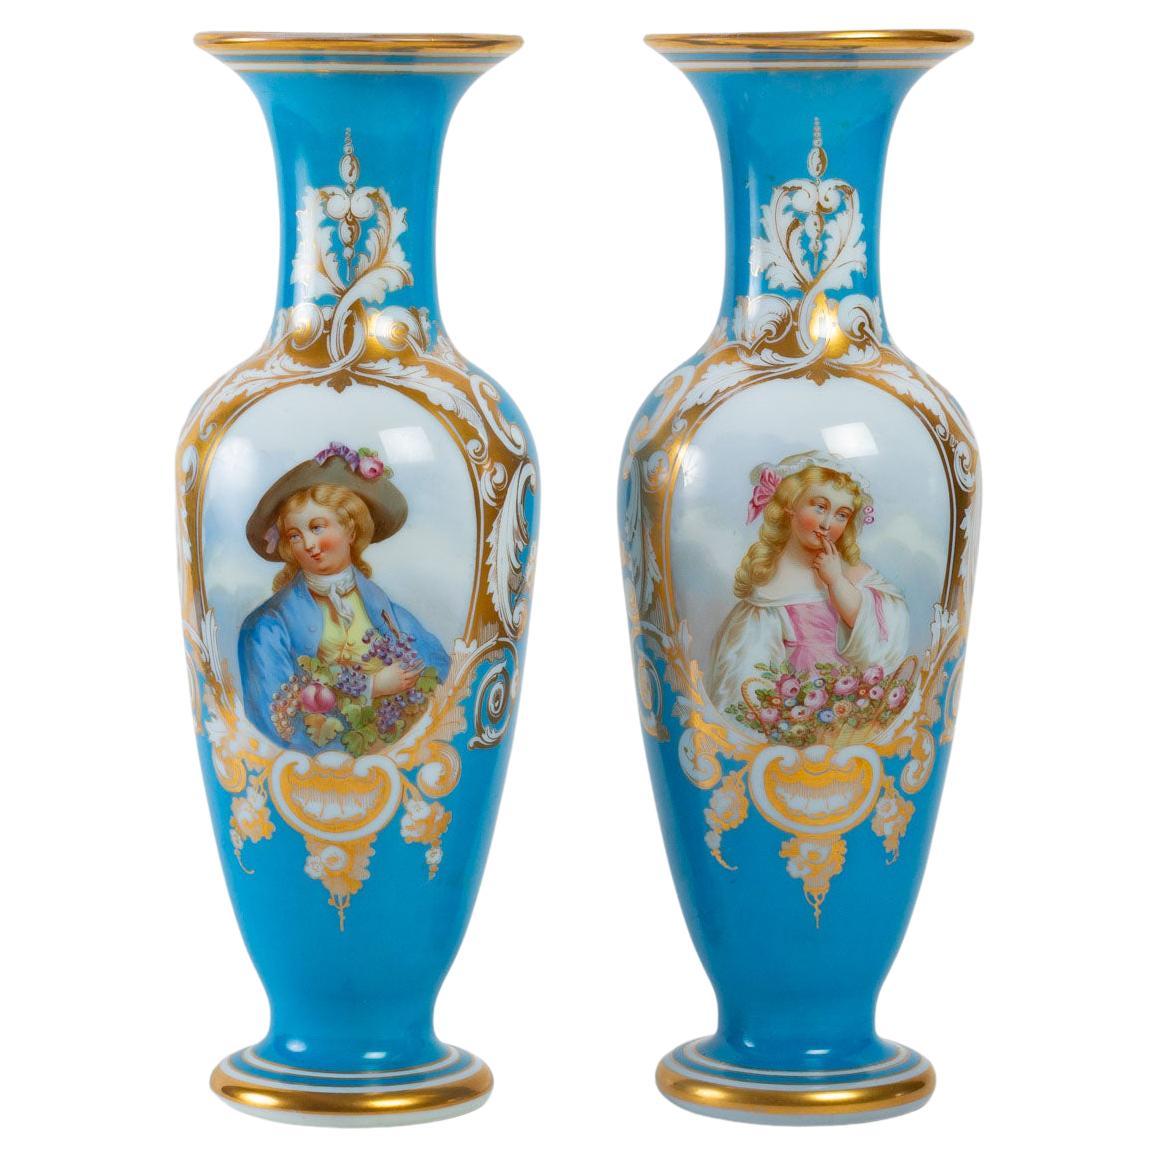 Pair of White and Sky Blue Opaline Vases